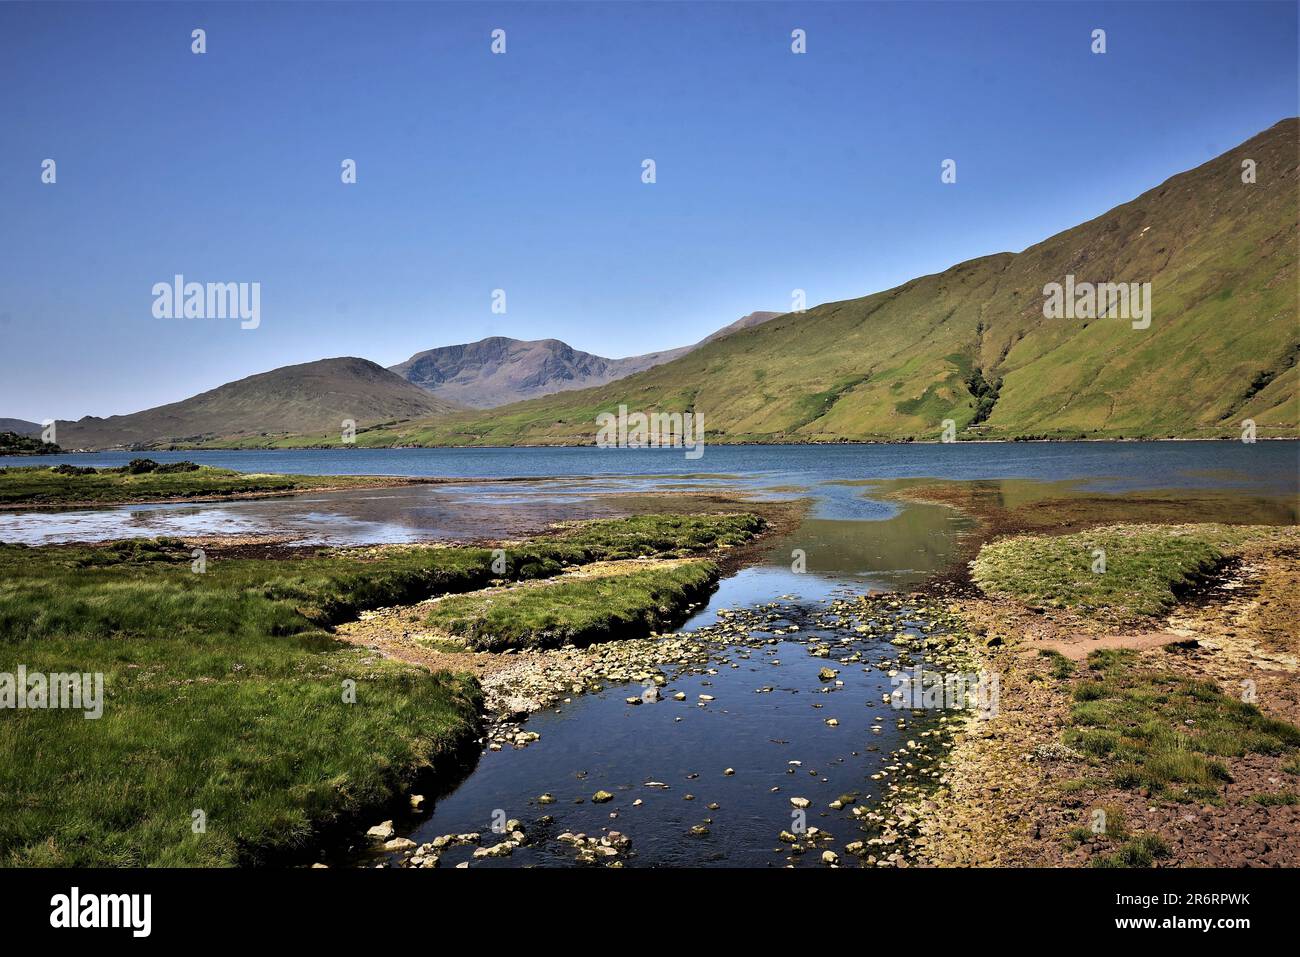 Republic of Ireland feature, pictures show location of the film the Field. KILLARY FJORD, Connemara cottage, donkeys, RIVER OWENRIFF, County Galway Stock Photo